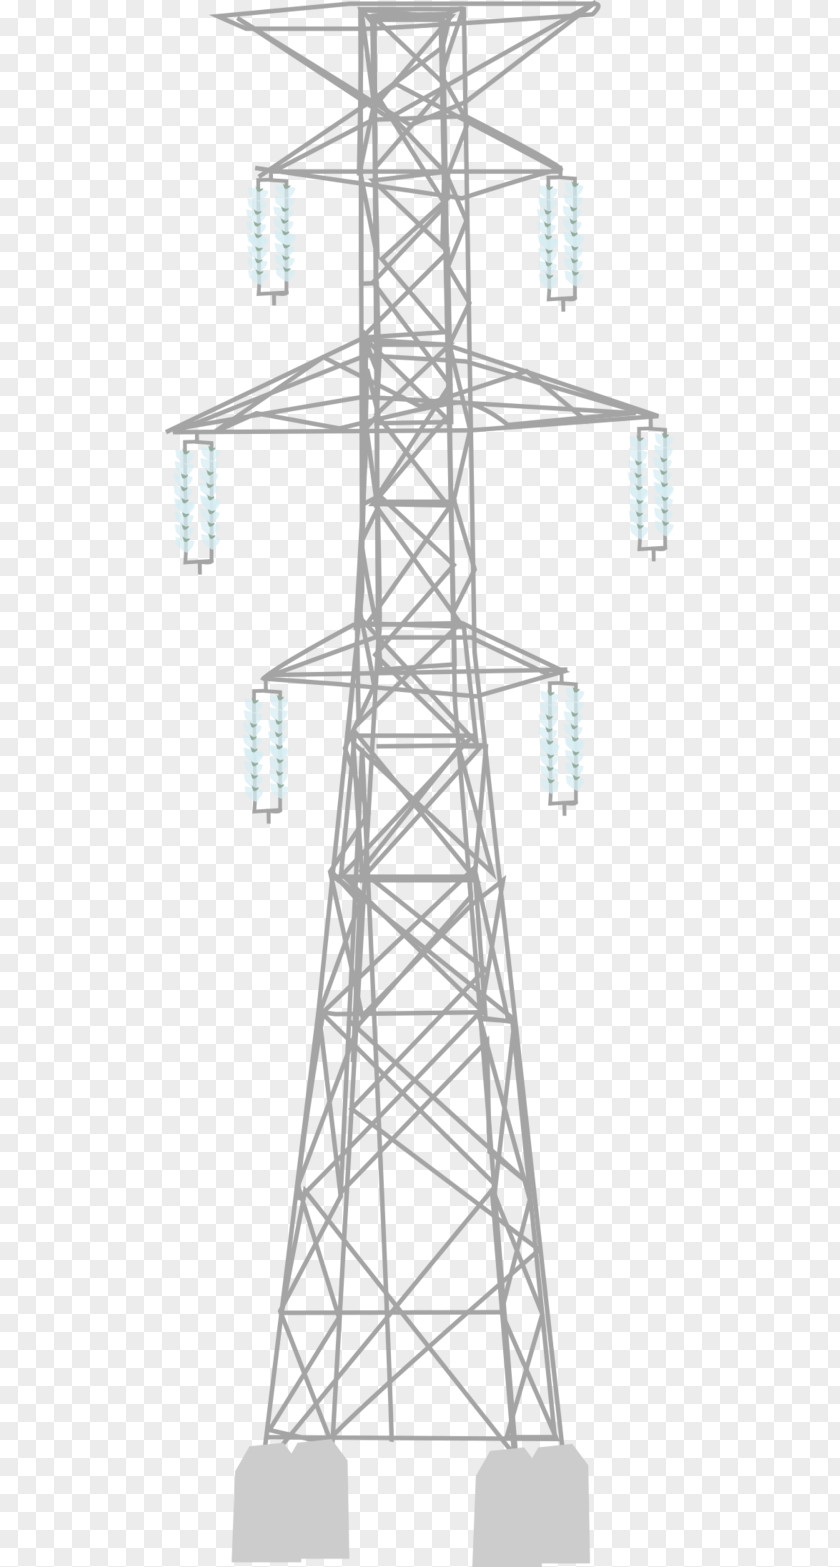 High Voltage Electricity Transmission Tower Insulator Overhead Power Line PNG